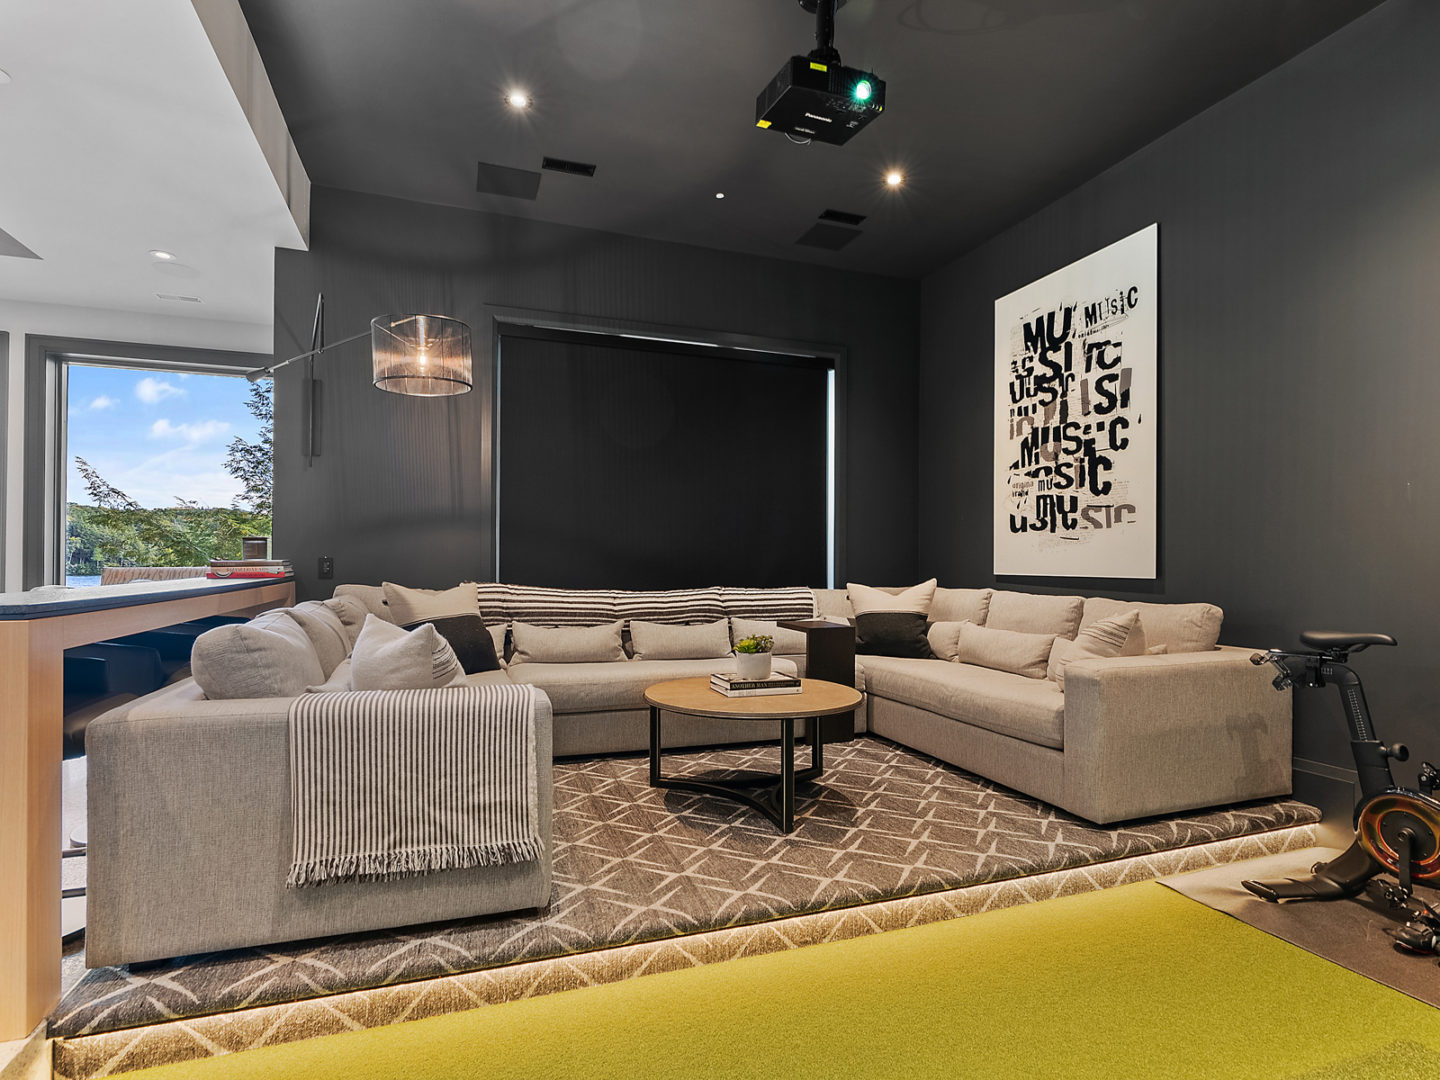 Entertaining area with large sectional couch